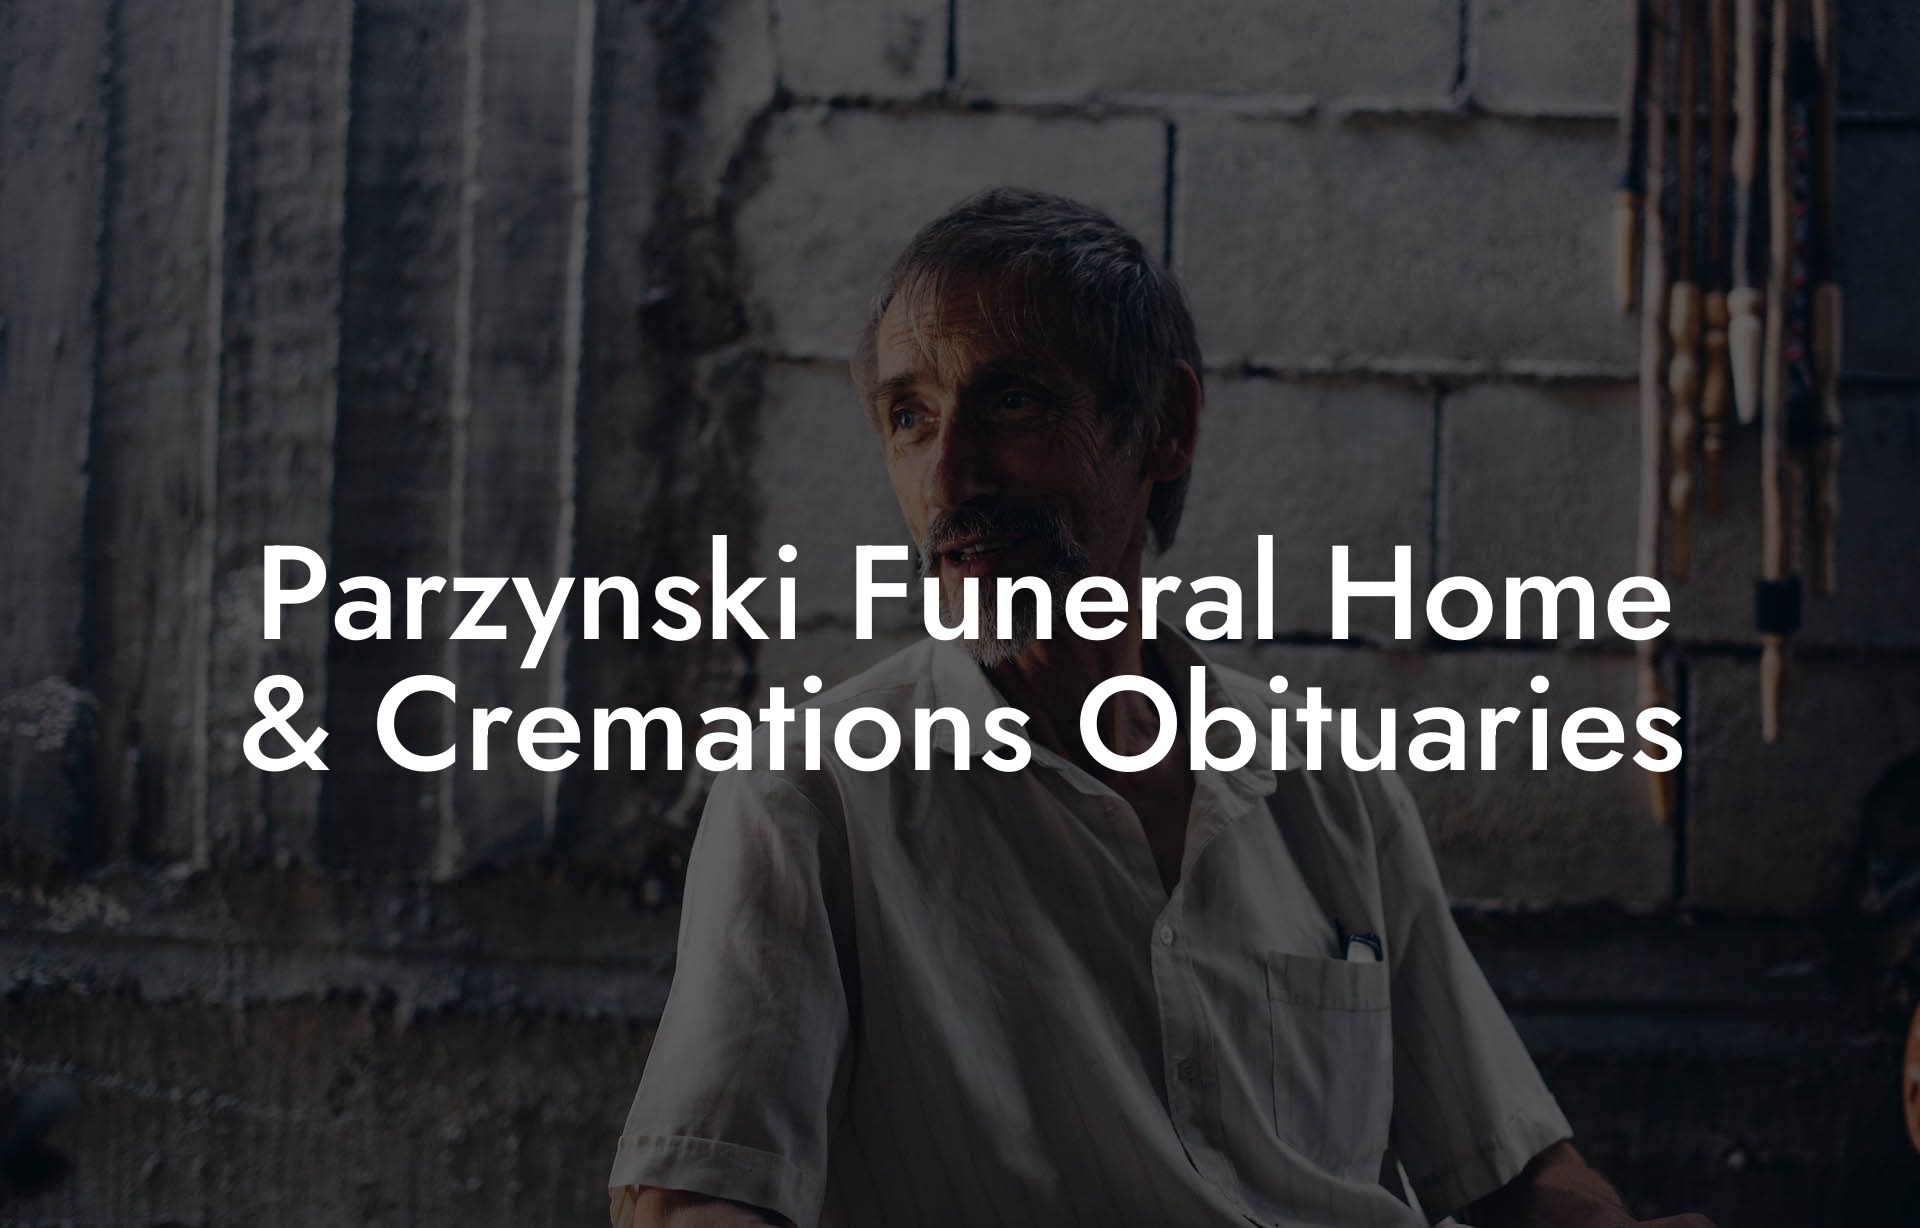 Parzynski Funeral Home & Cremations Obituaries